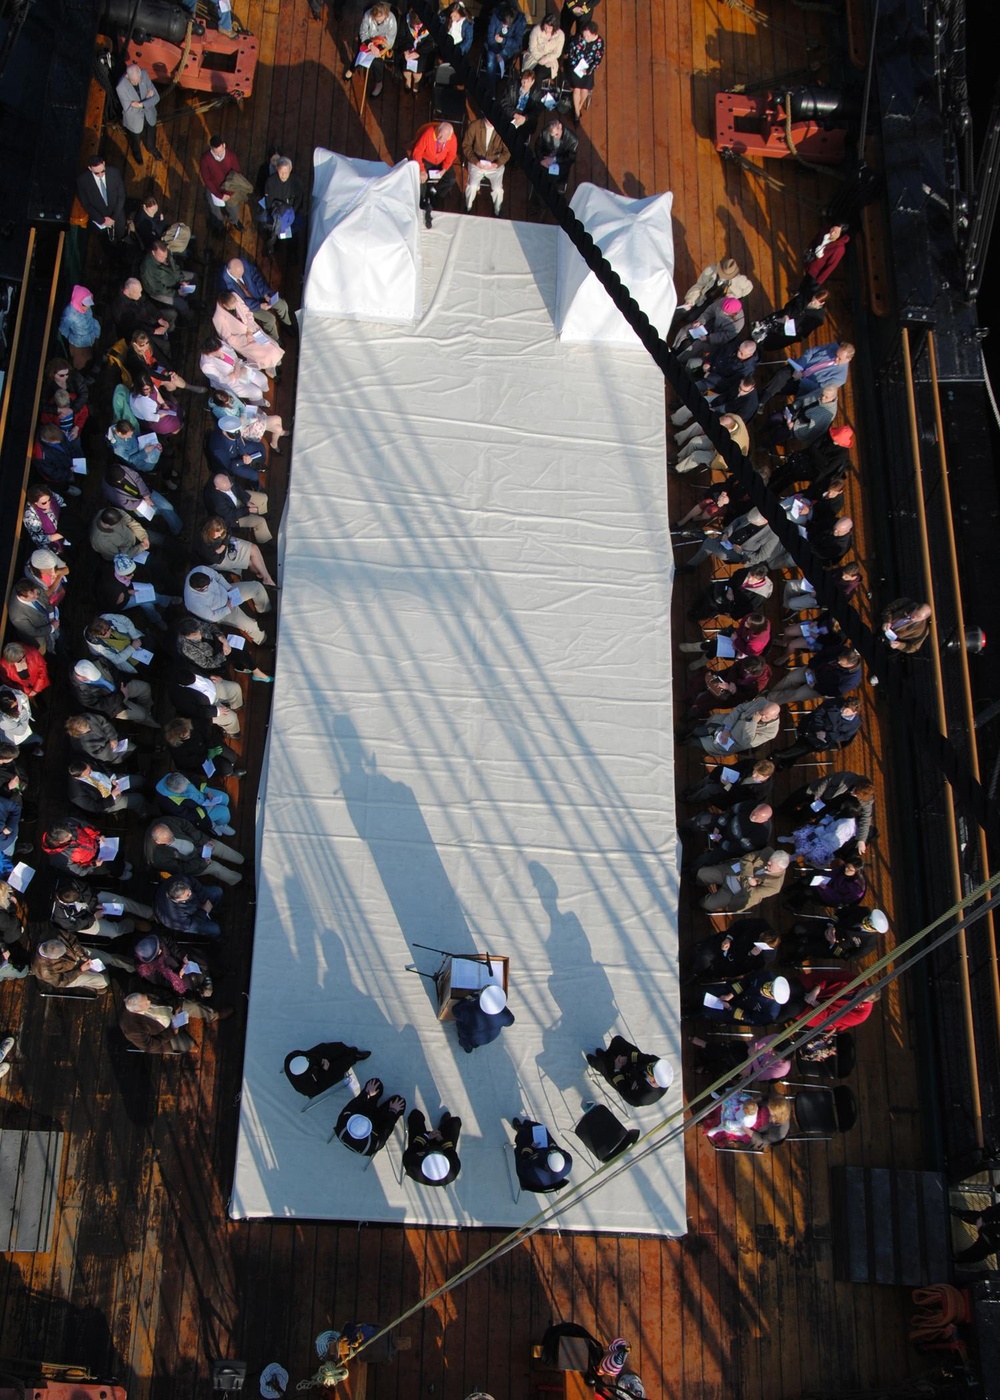 Easter service held aboard USS Constitution